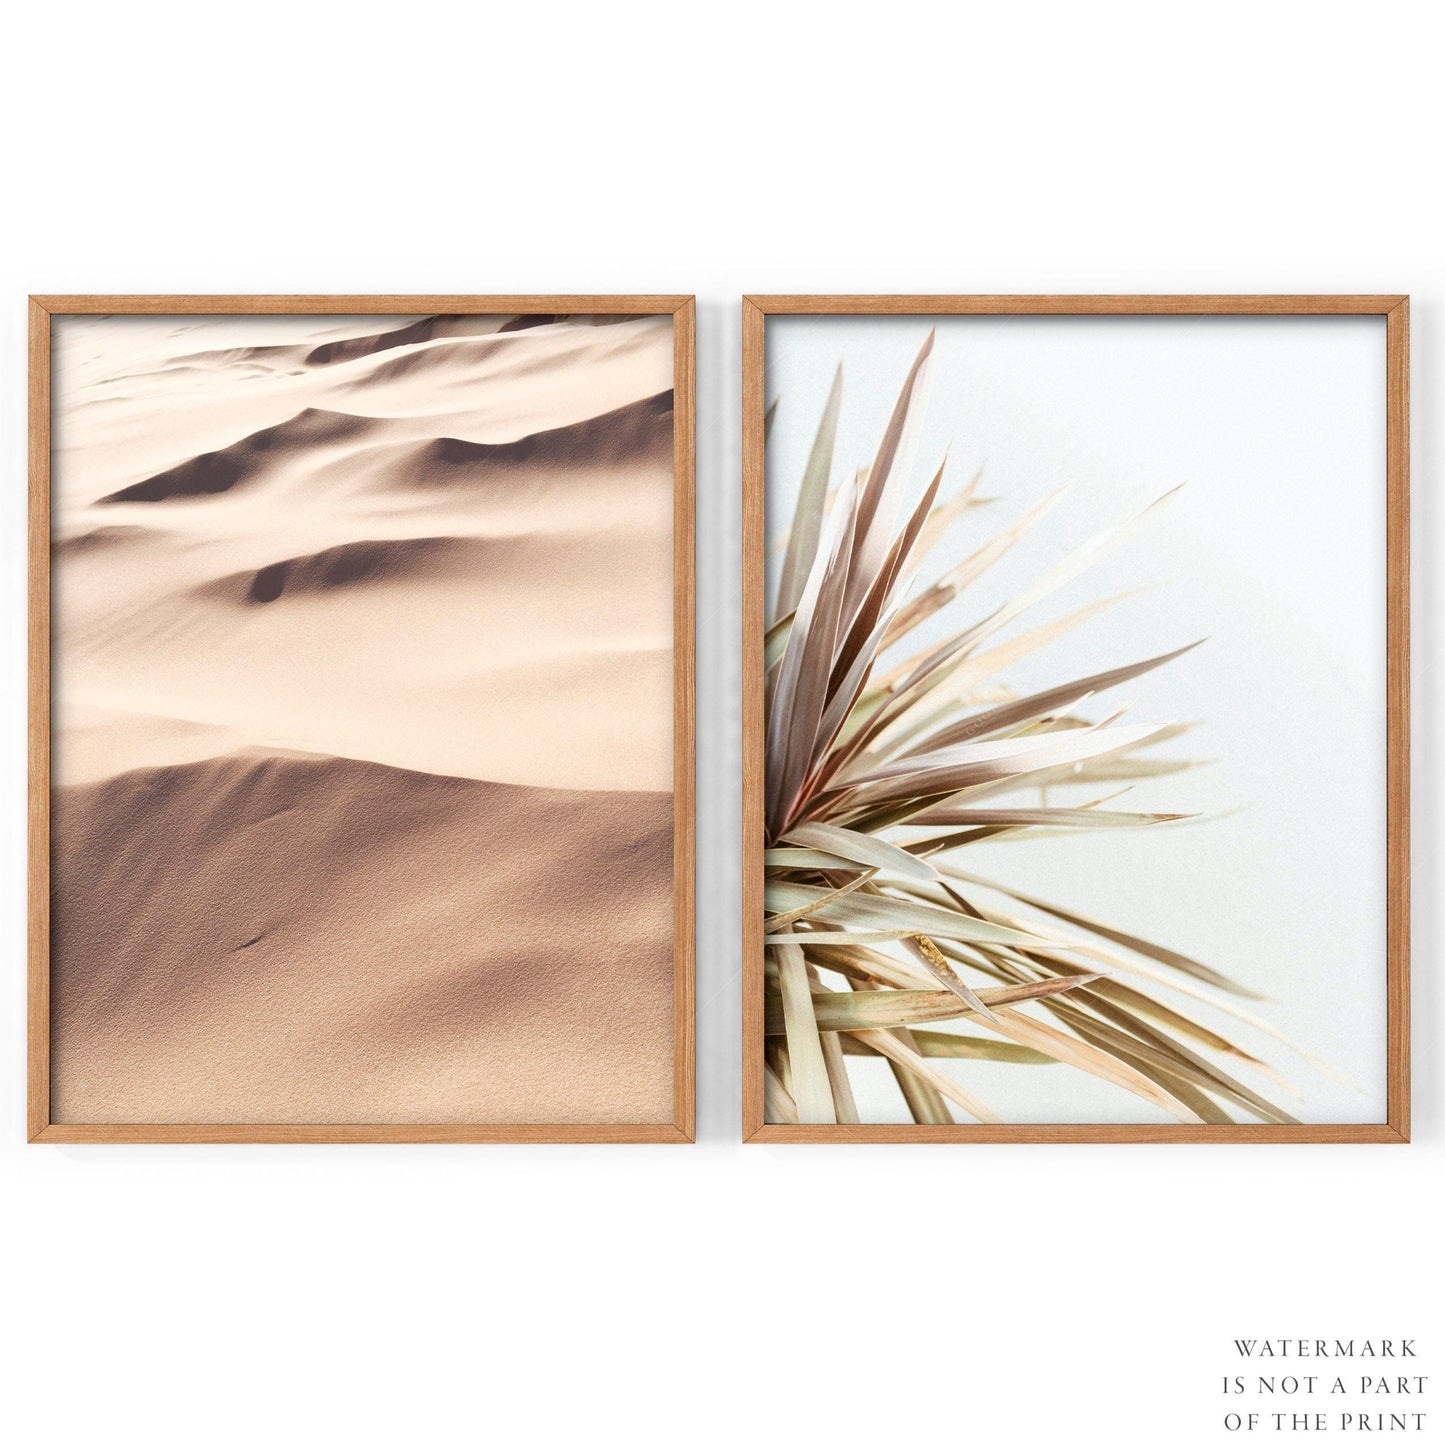 Home Poster Decor Set of 2 Neutral Wall Decor, Modern Abstract Prints, Beige Earth Tones, Leaves Leaf Photo, Desert Sand Poster, Nature Gallery Wall, Set of 2, 0-2